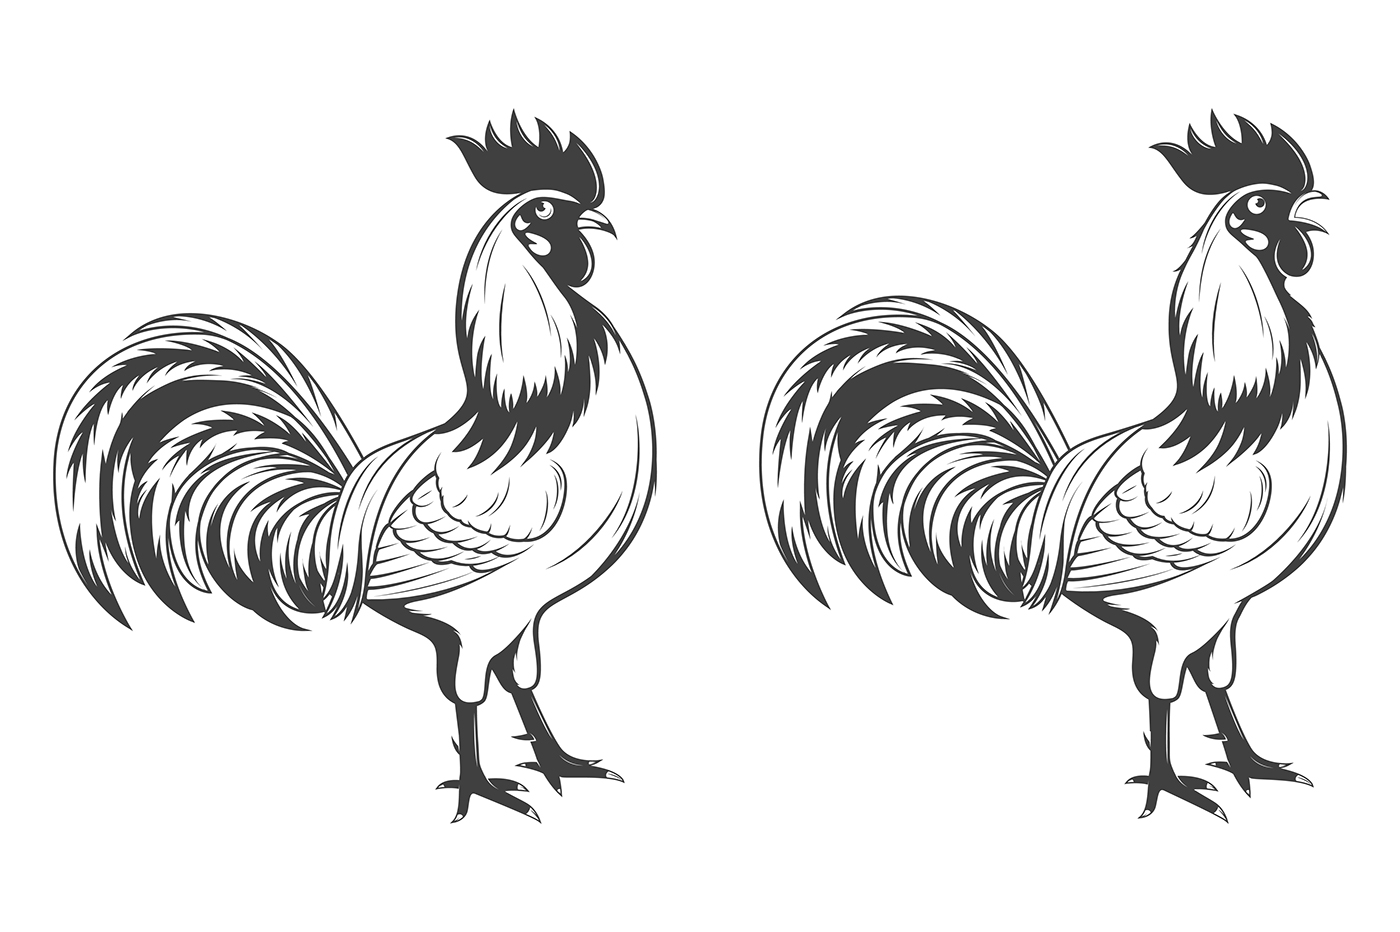 CHICKEN HEN ROOSTER ART FARM ROOSTER VECTOR VINTAGE ROOSTER ROOSTER NEW YEAR VECTOR 2017 COCK LUNAR CHINA ART SCETCH DESIGN ELEMENT TEMPLATE BLACK AND WHITE GREETING DECORATION ORIENTAL CHINESE CONCEPT